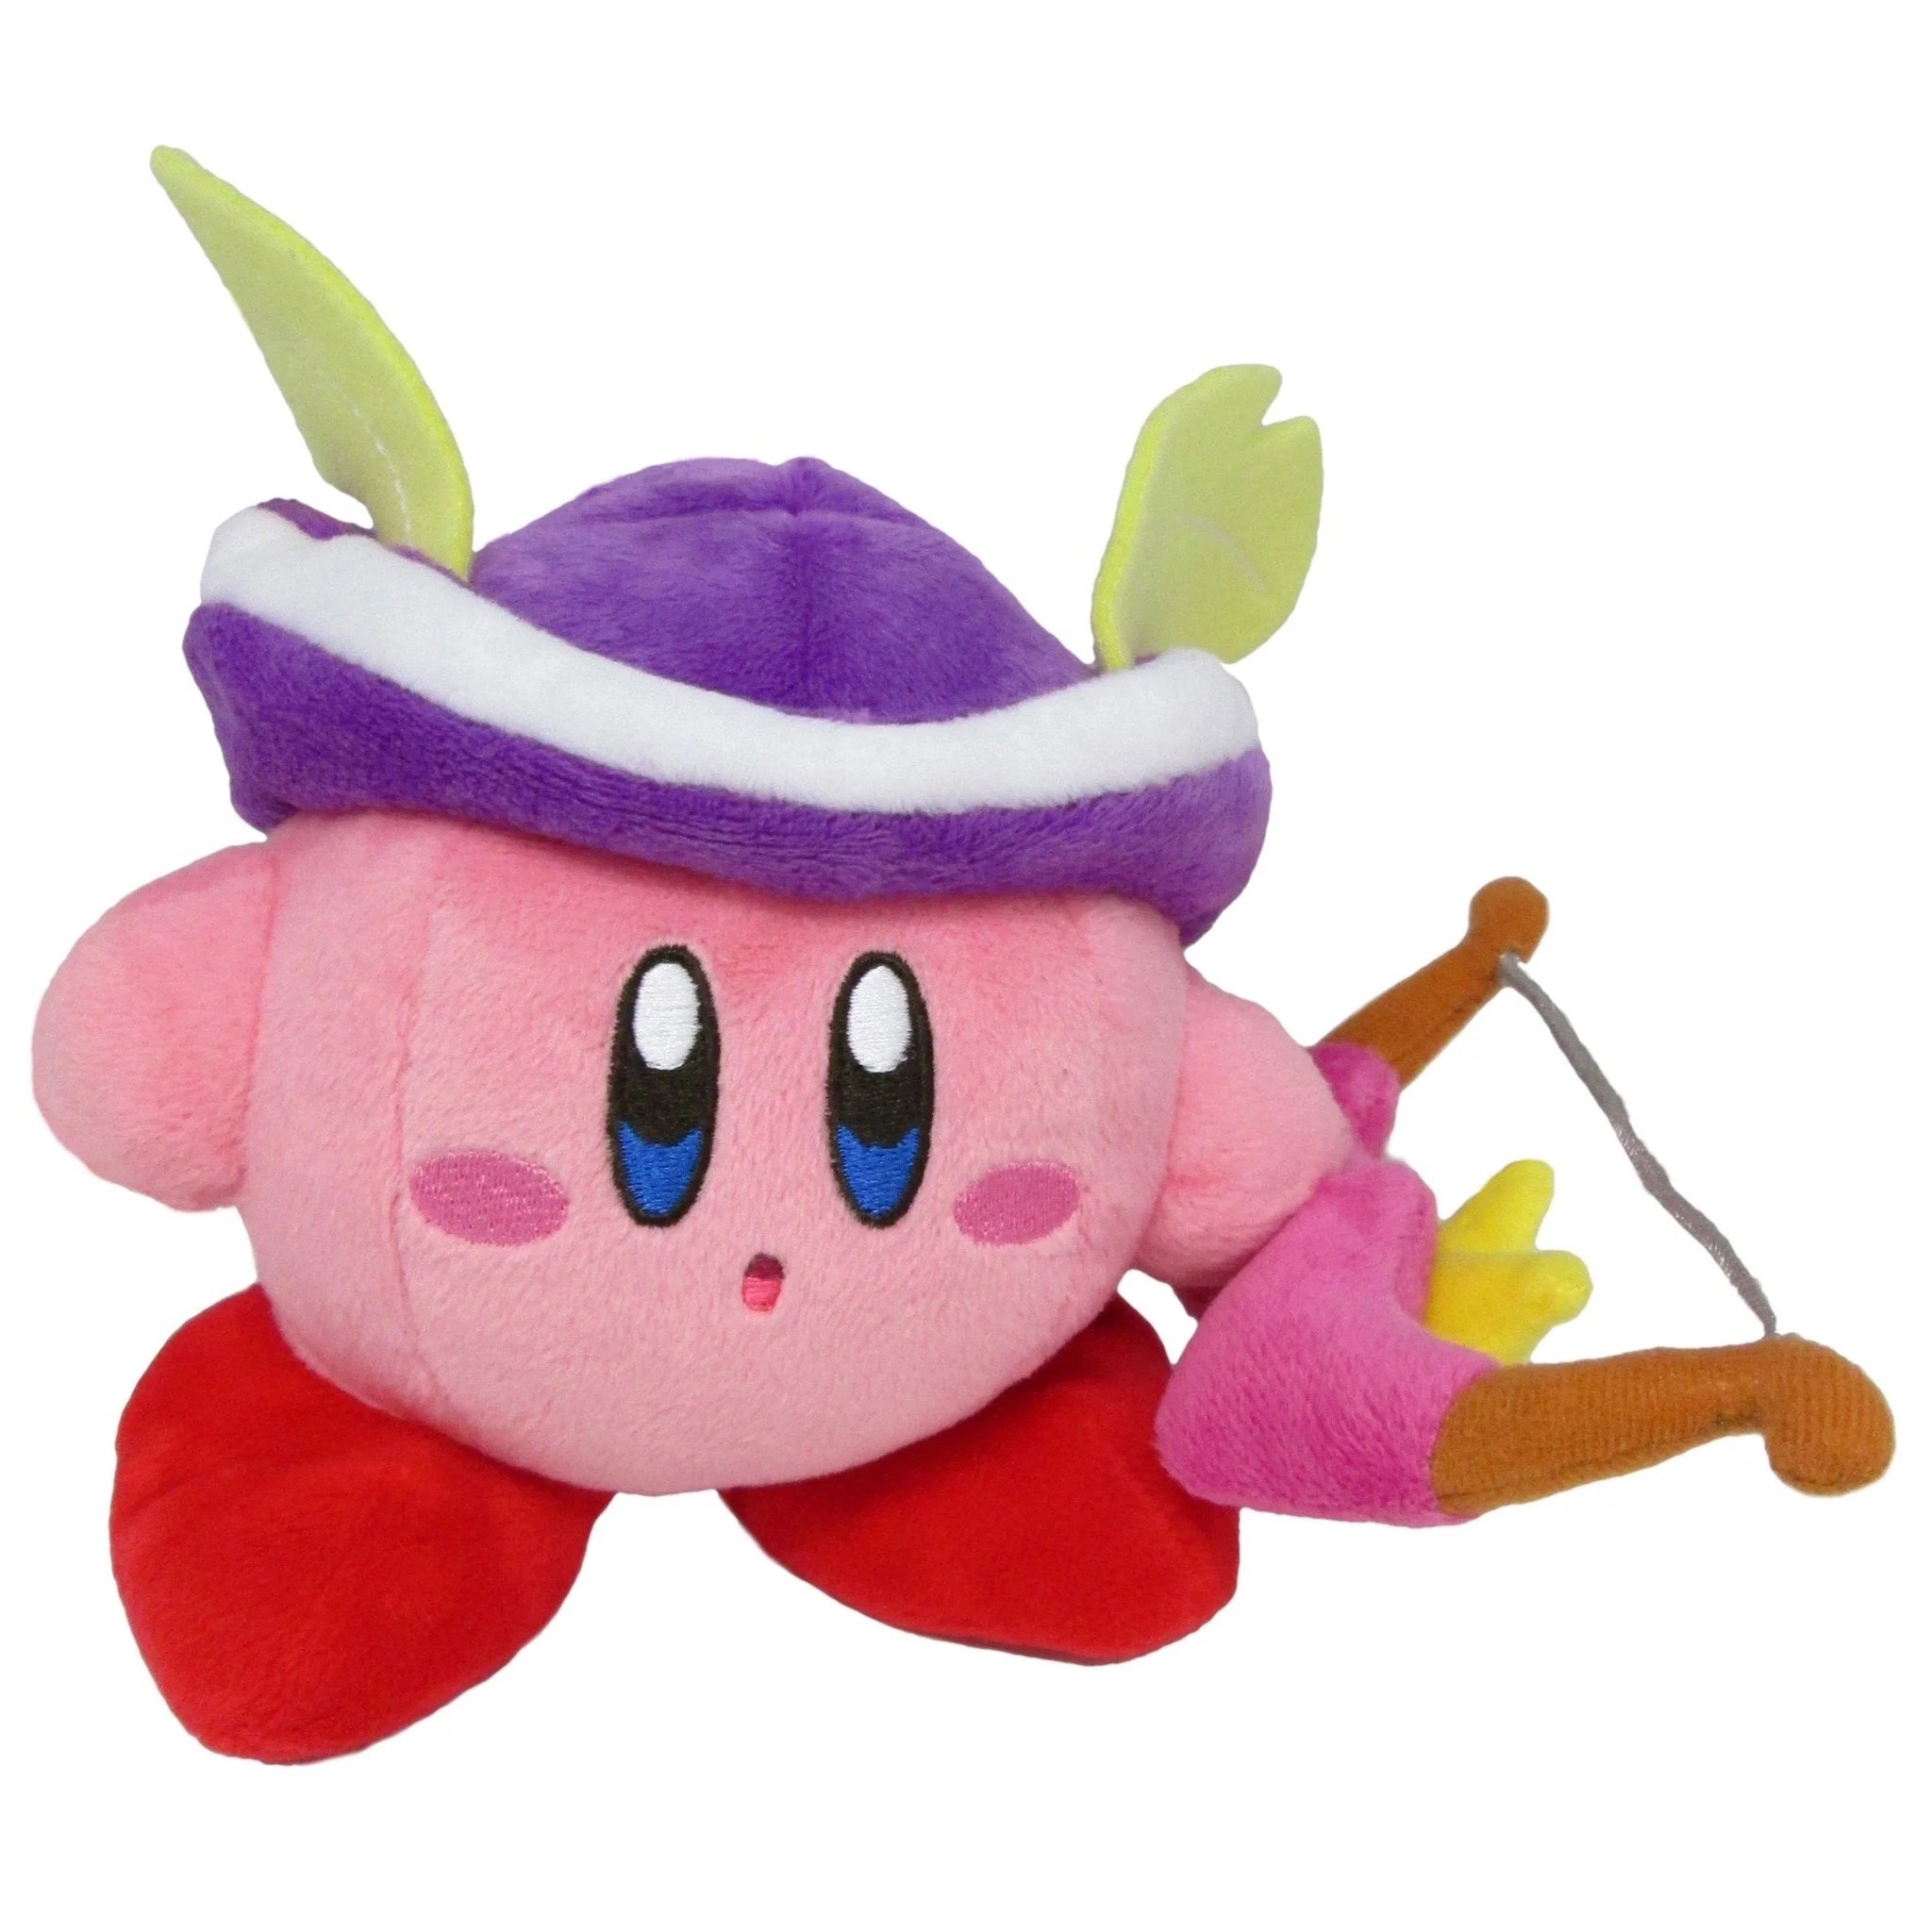 Kirby's Adventure: All Star Collection - Sniper Kirby Plush 5"